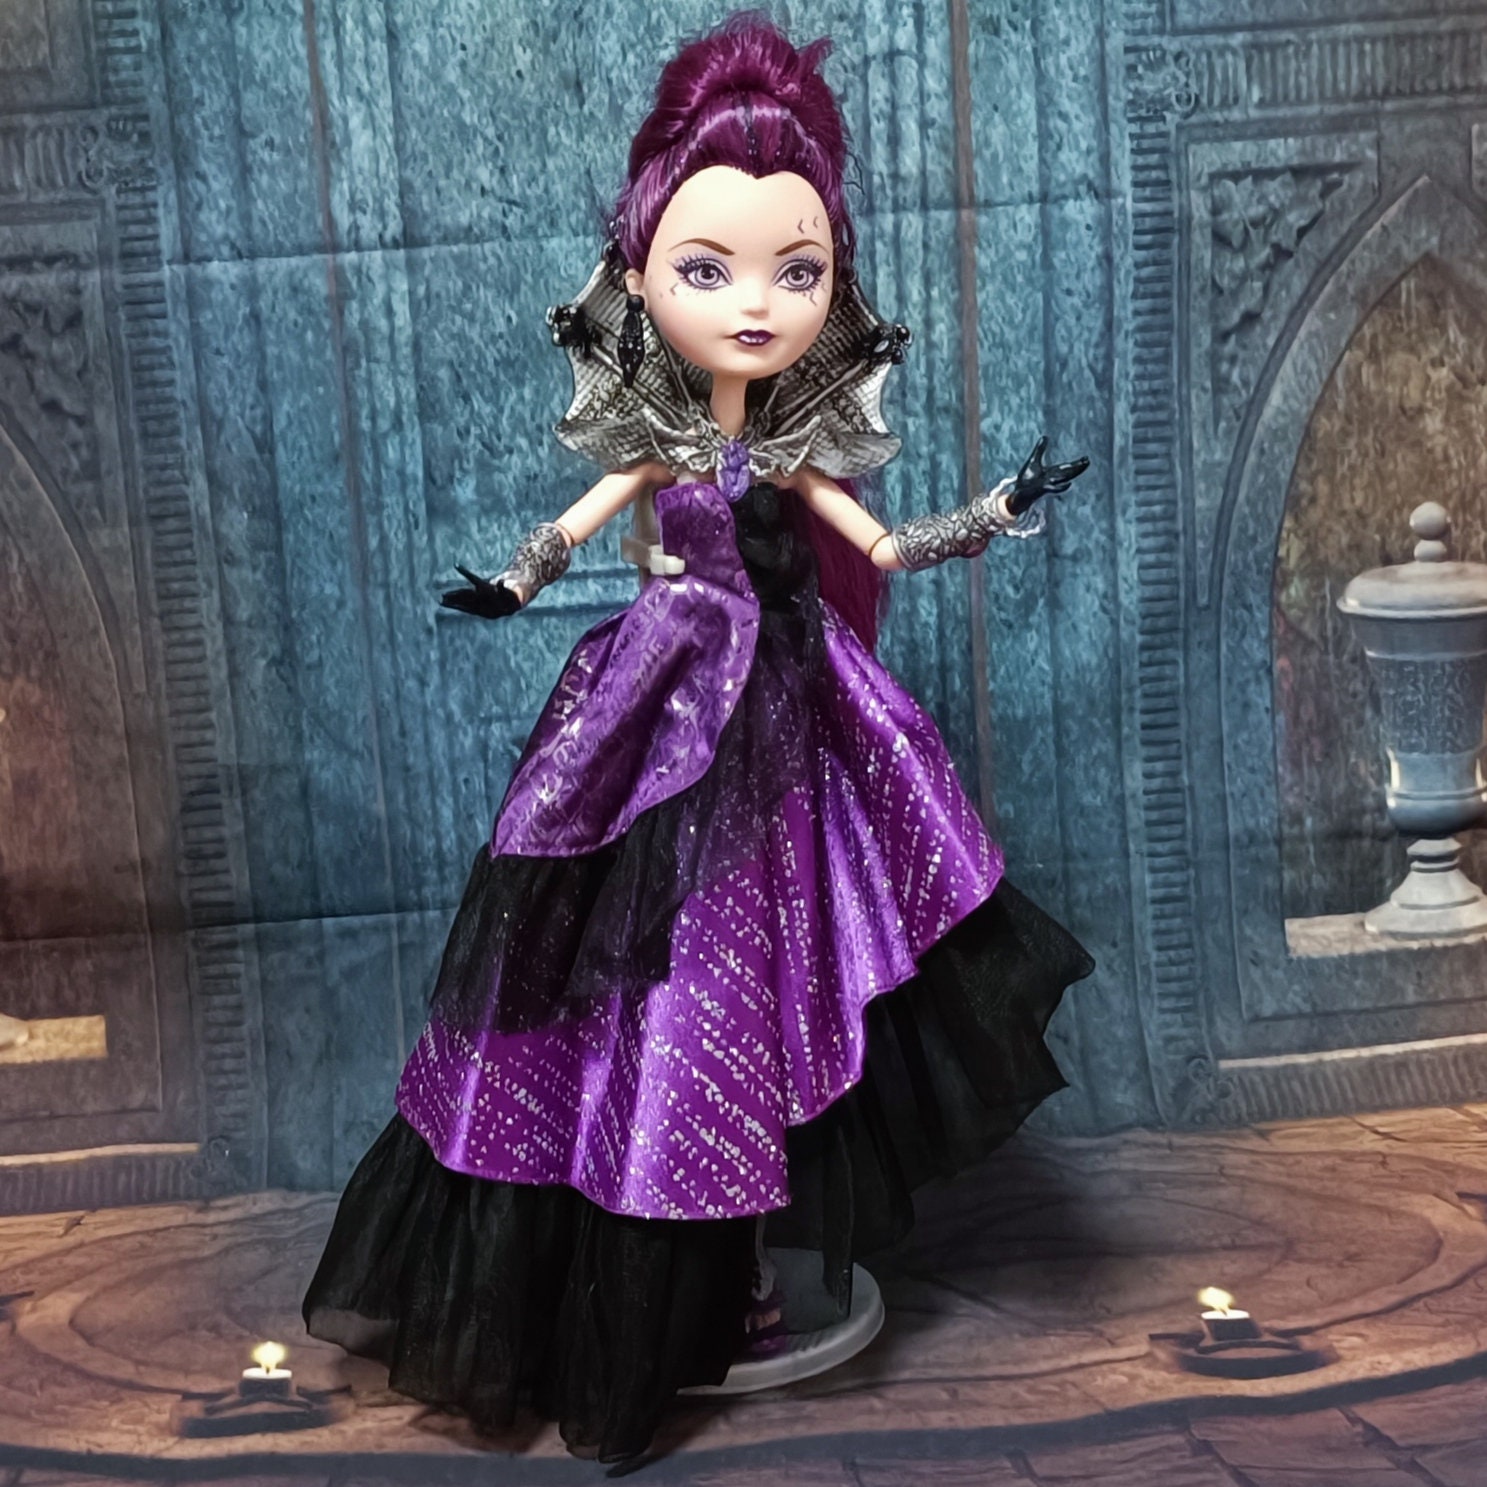 Ever After High First Chapter Raven Queen Doll / HTF Dress Shoes